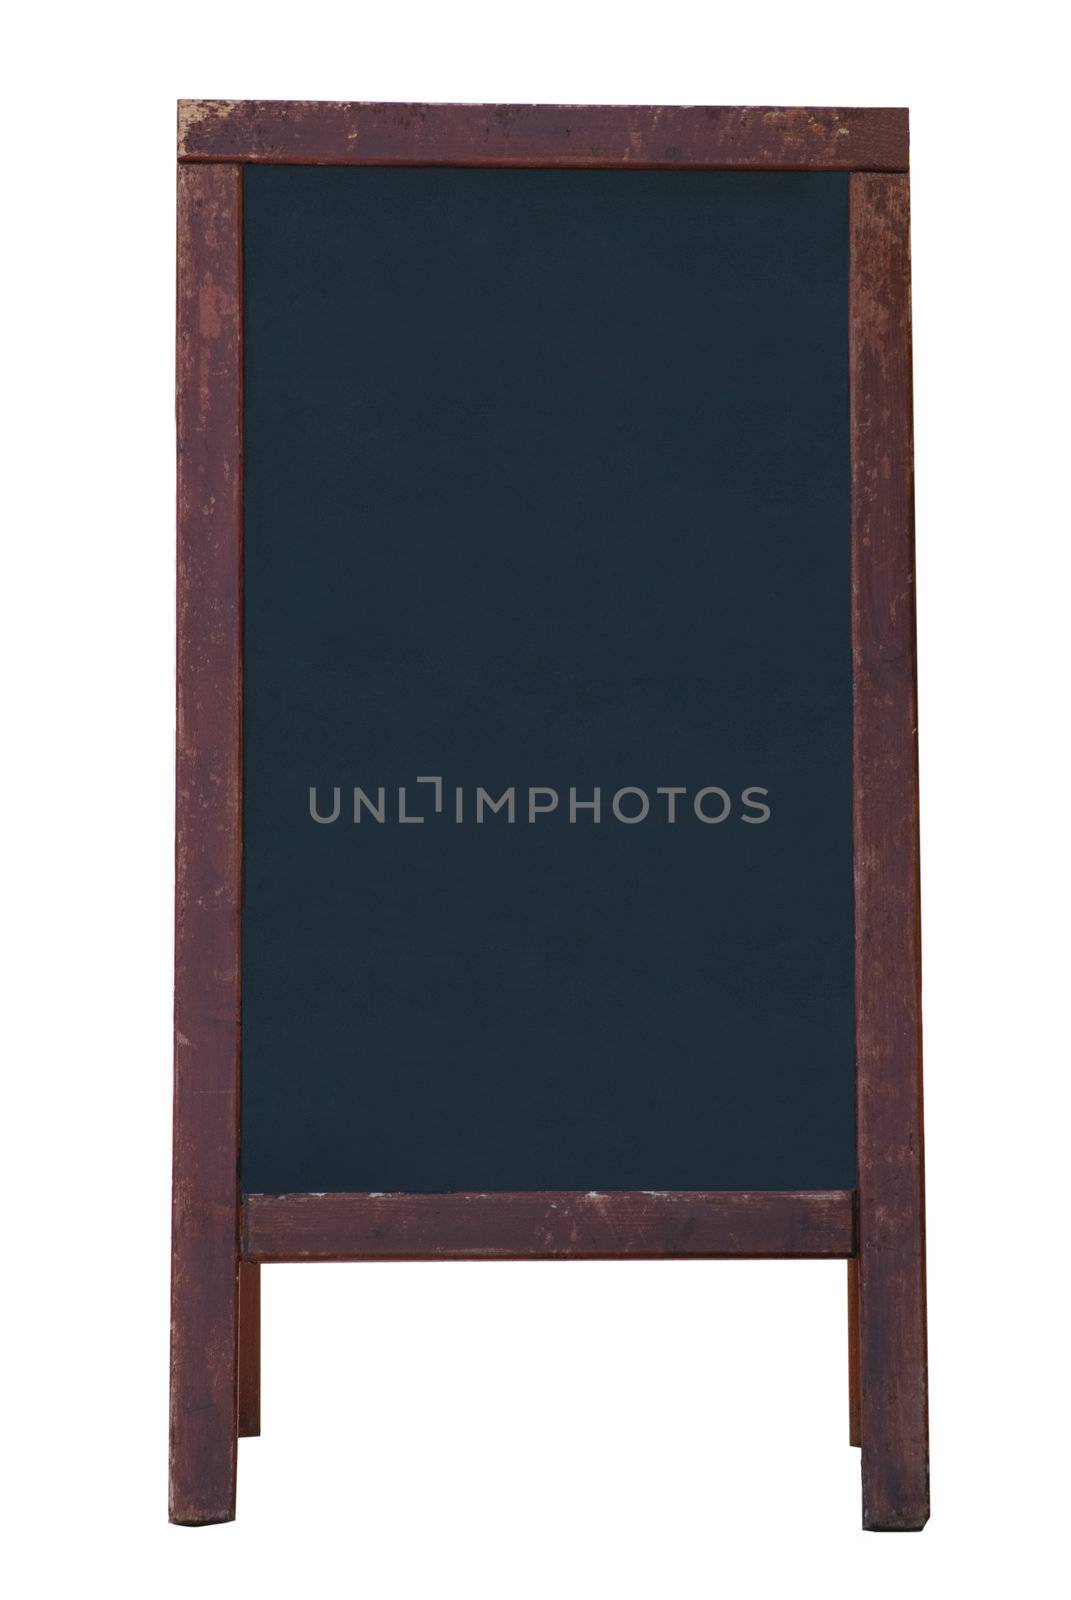 A blank, freestanding blackboard style noticeboard with wooden frame, isolated on a white background.  Weathered frame. Copy space on board.